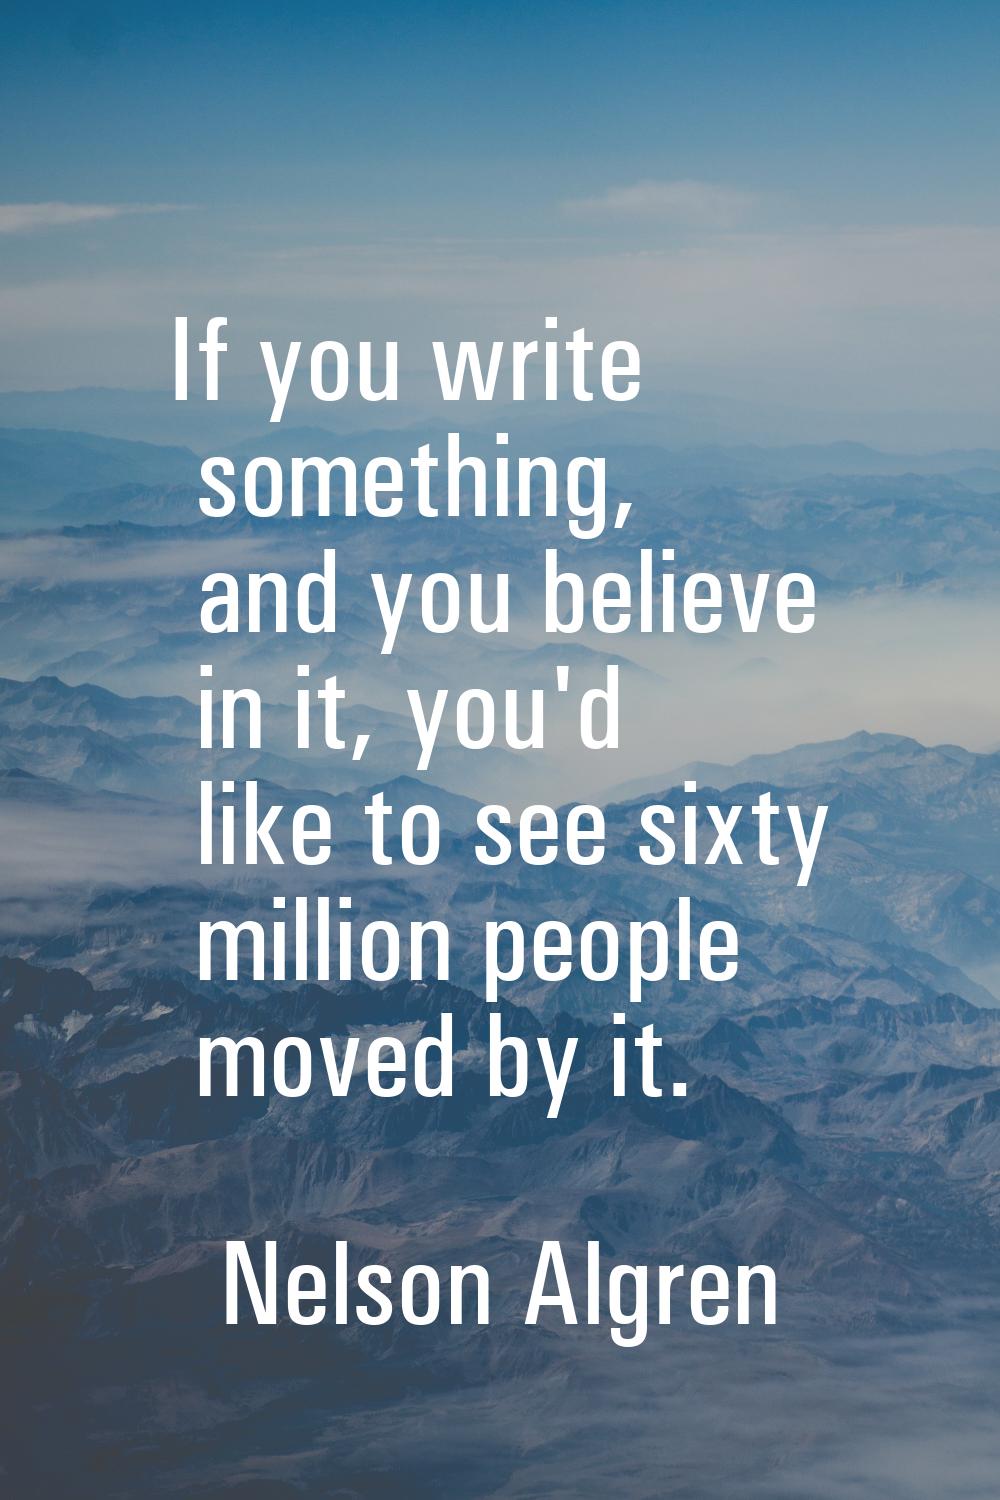 If you write something, and you believe in it, you'd like to see sixty million people moved by it.